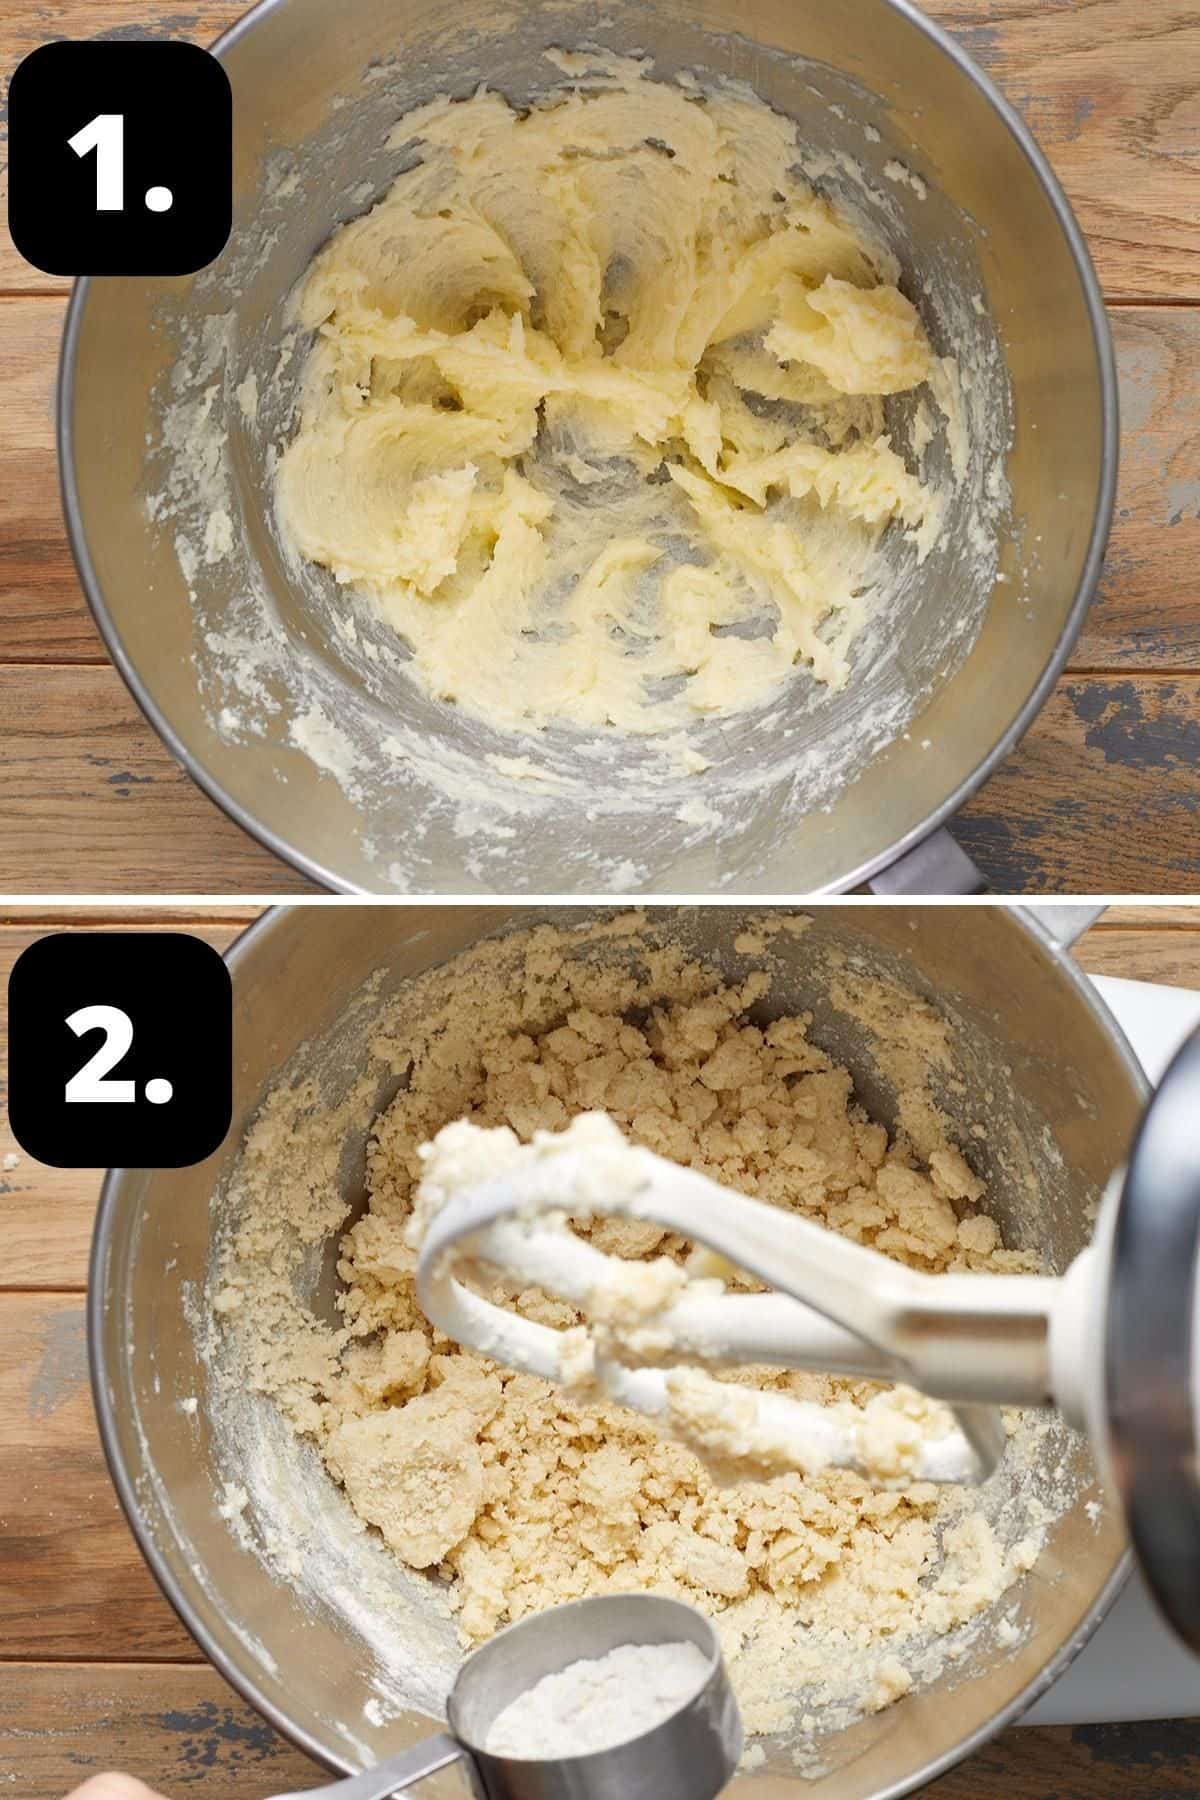 Steps 1-2 of preparing this recipe - creaming the butter and sugar in a bowl and gradually adding the flour to the mixture.